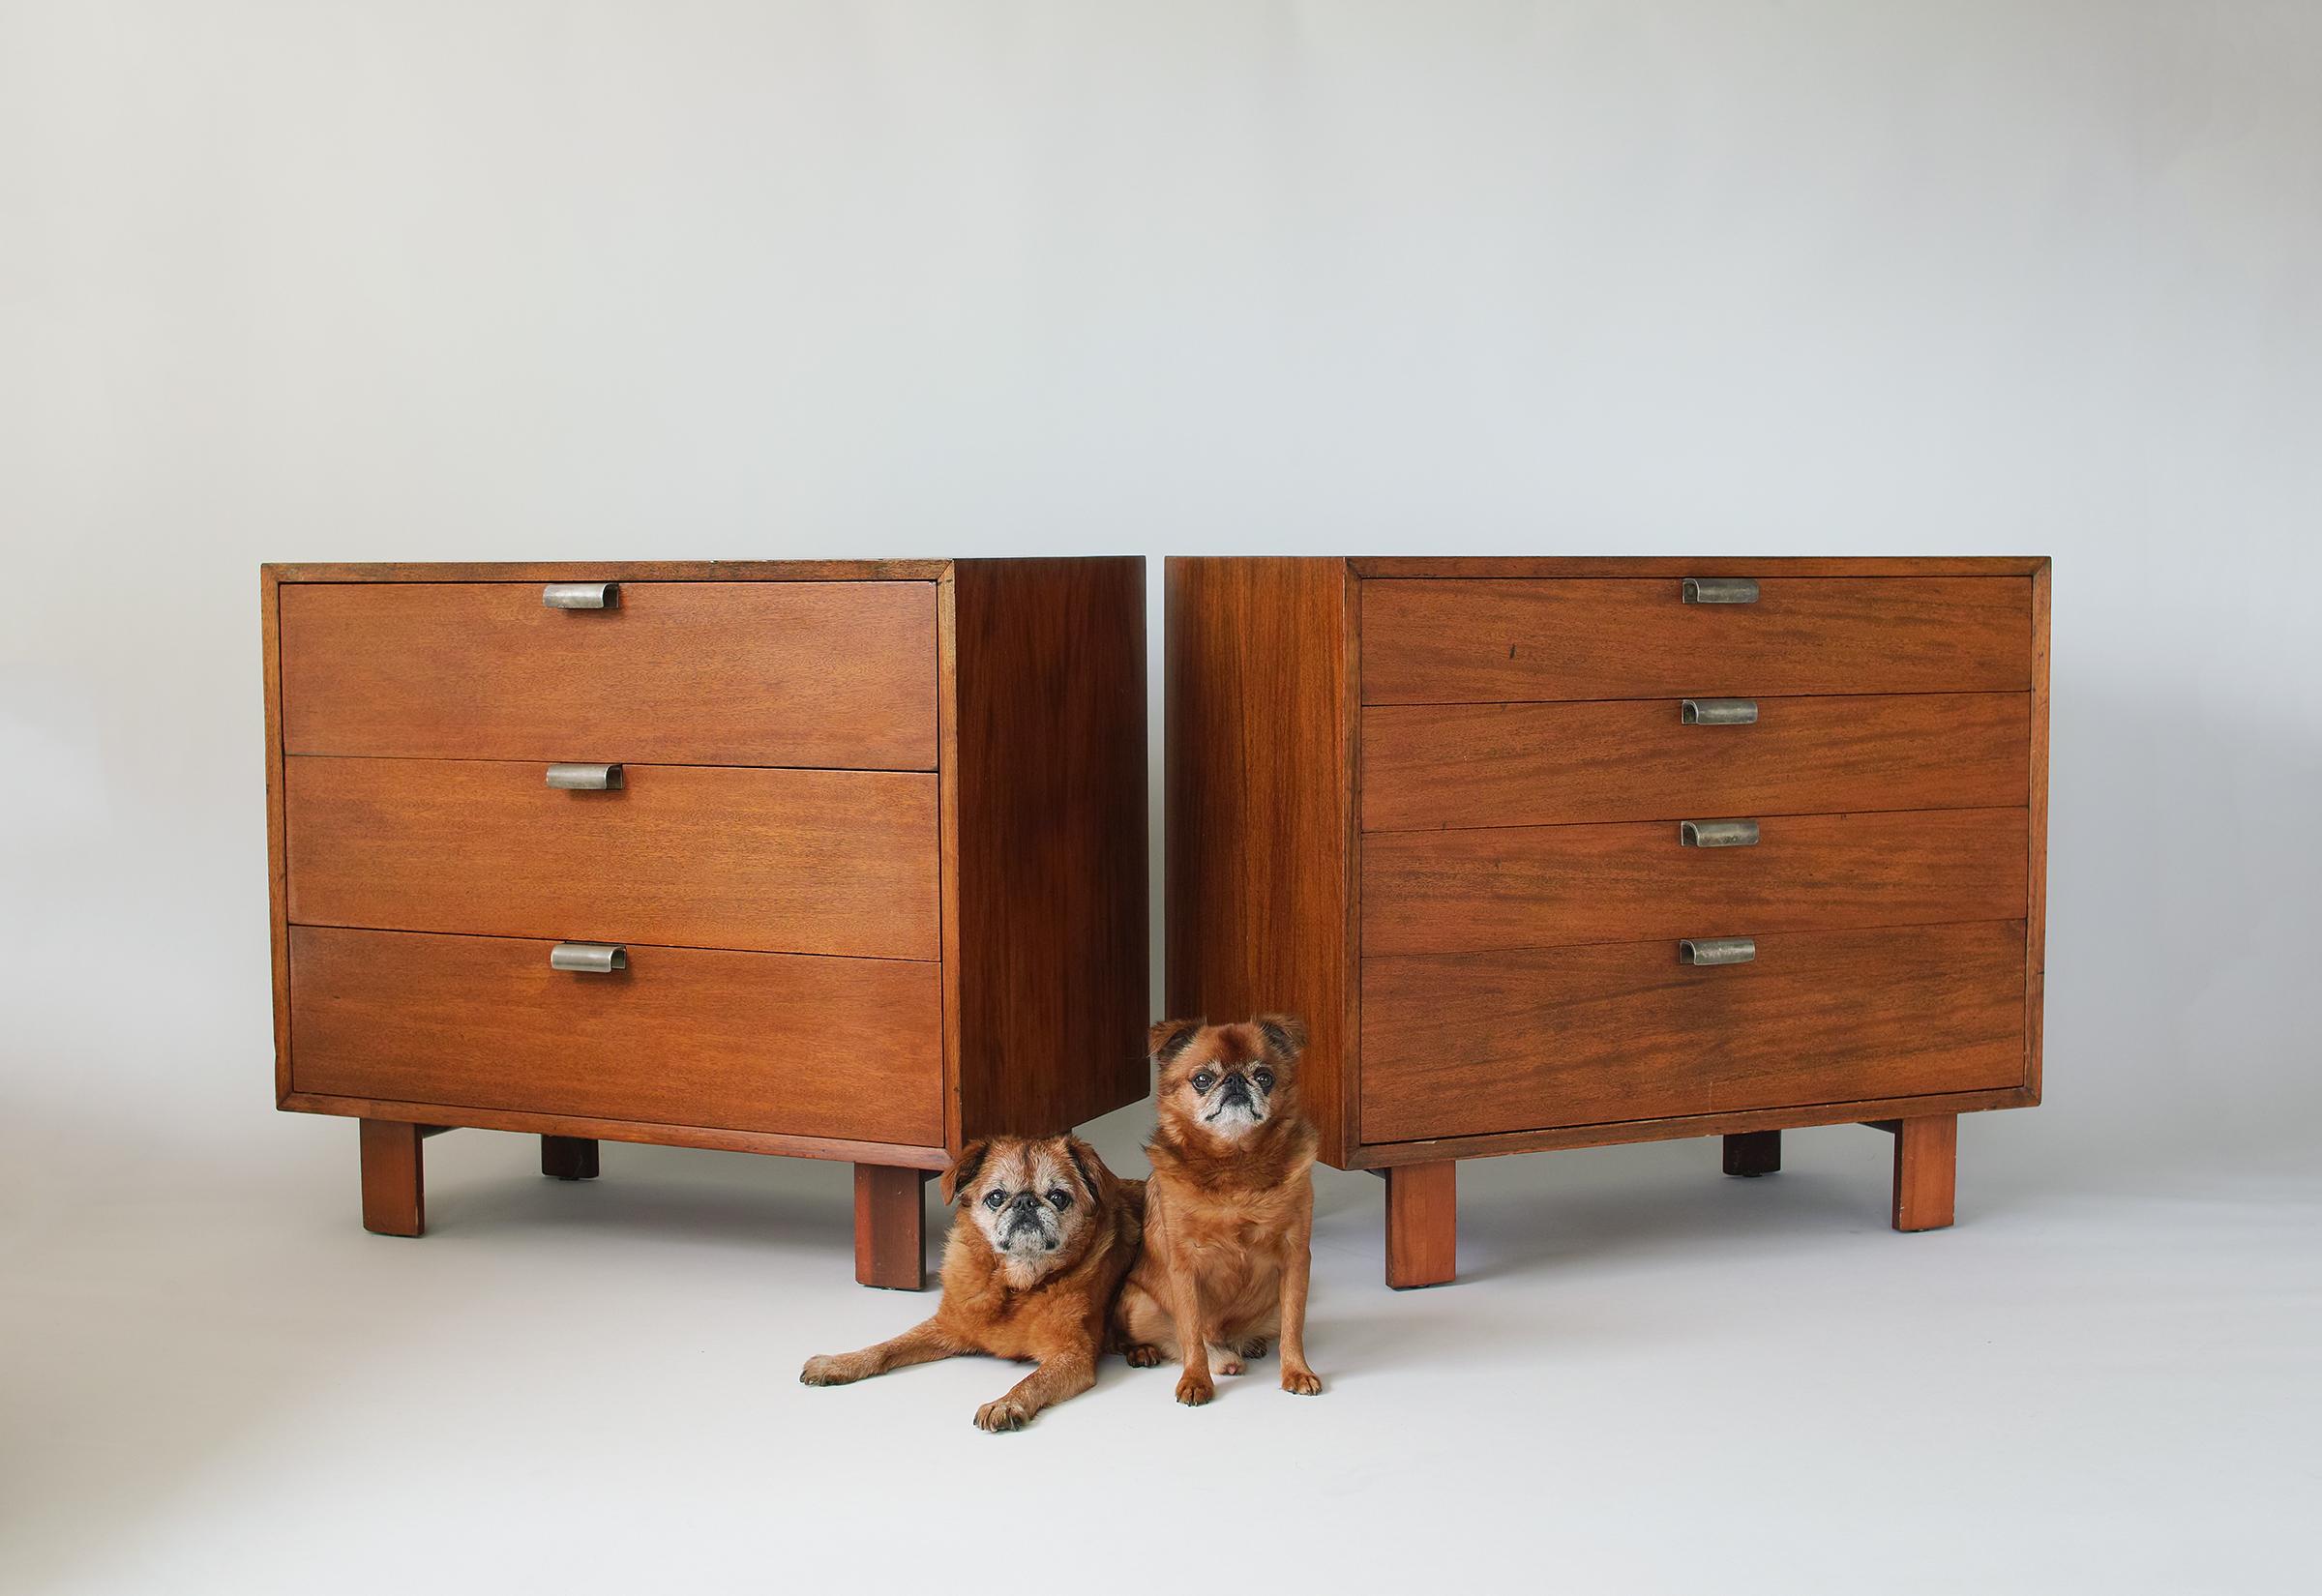 For your consideration is this handsome pair of George Nelson for Herman Miller chests of drawers featuring walnut cases with nice warm patina and original metal drawer pulls. The four drawer chest has interior dividers in both the top and bottom